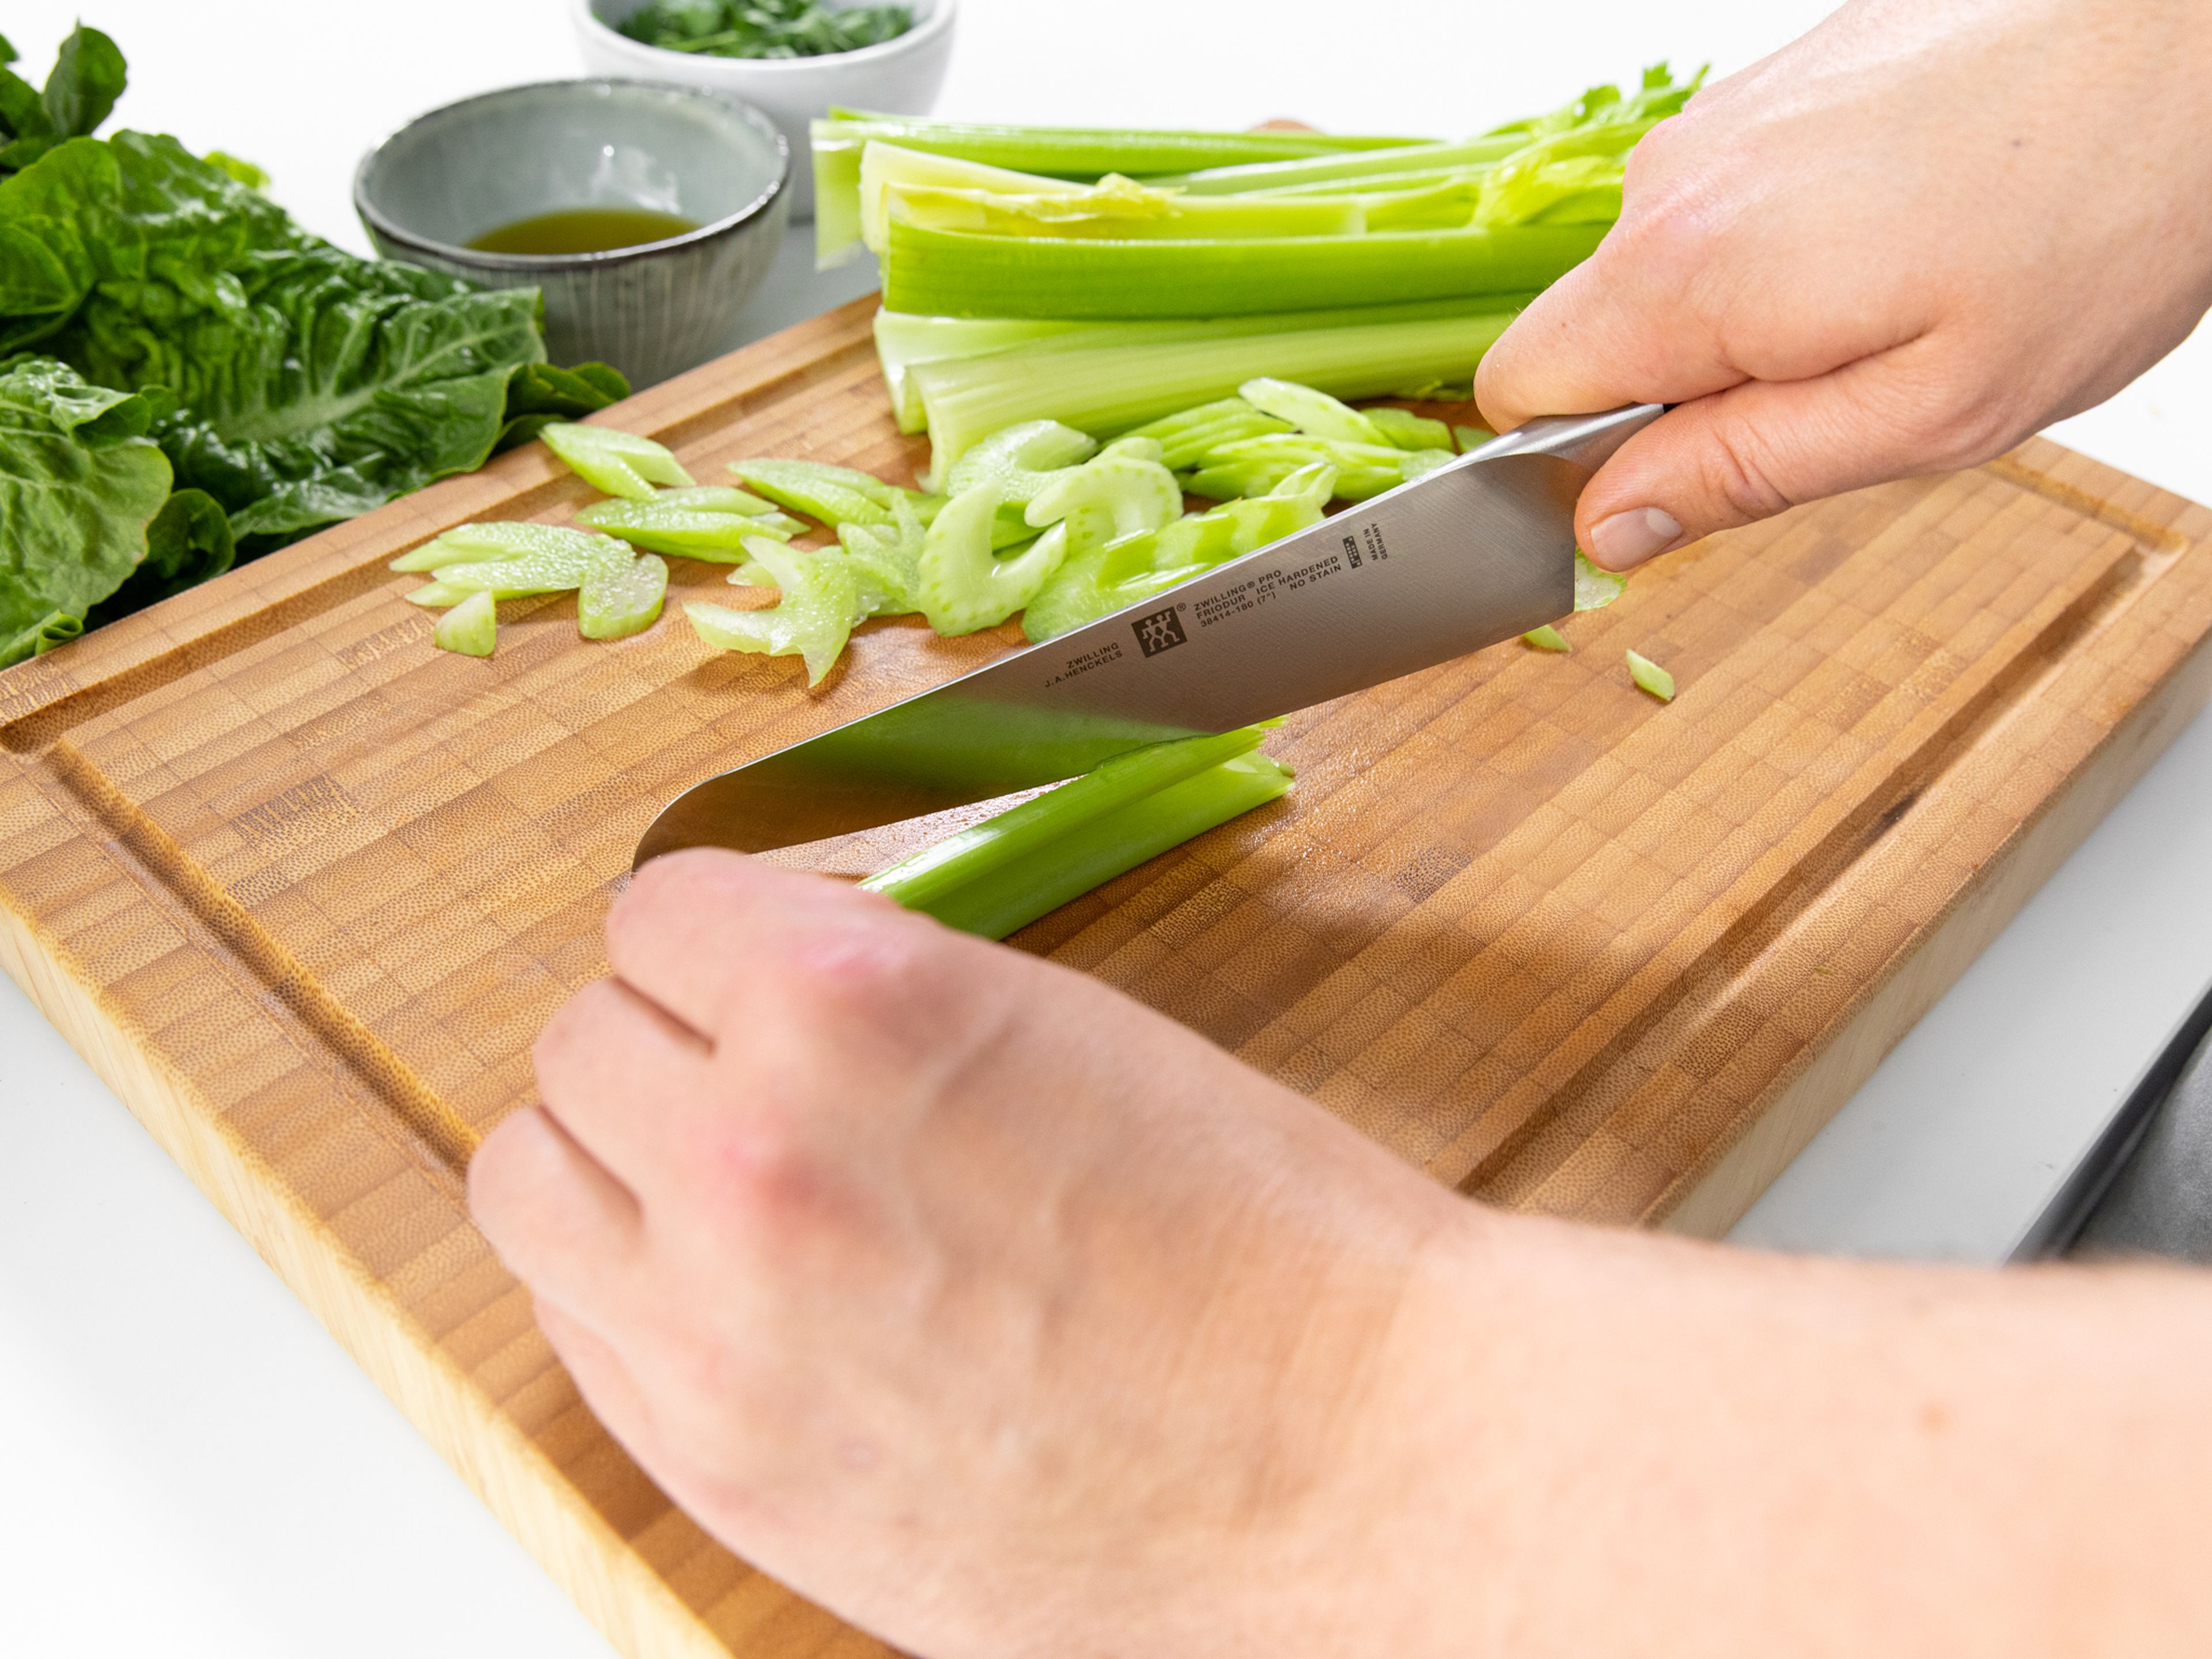 Thinly slice celery with a mandolin, or slice into cubes with a knife. Peel and cube the apples. Slice lettuce into strips. Peel and slice orange into segments.